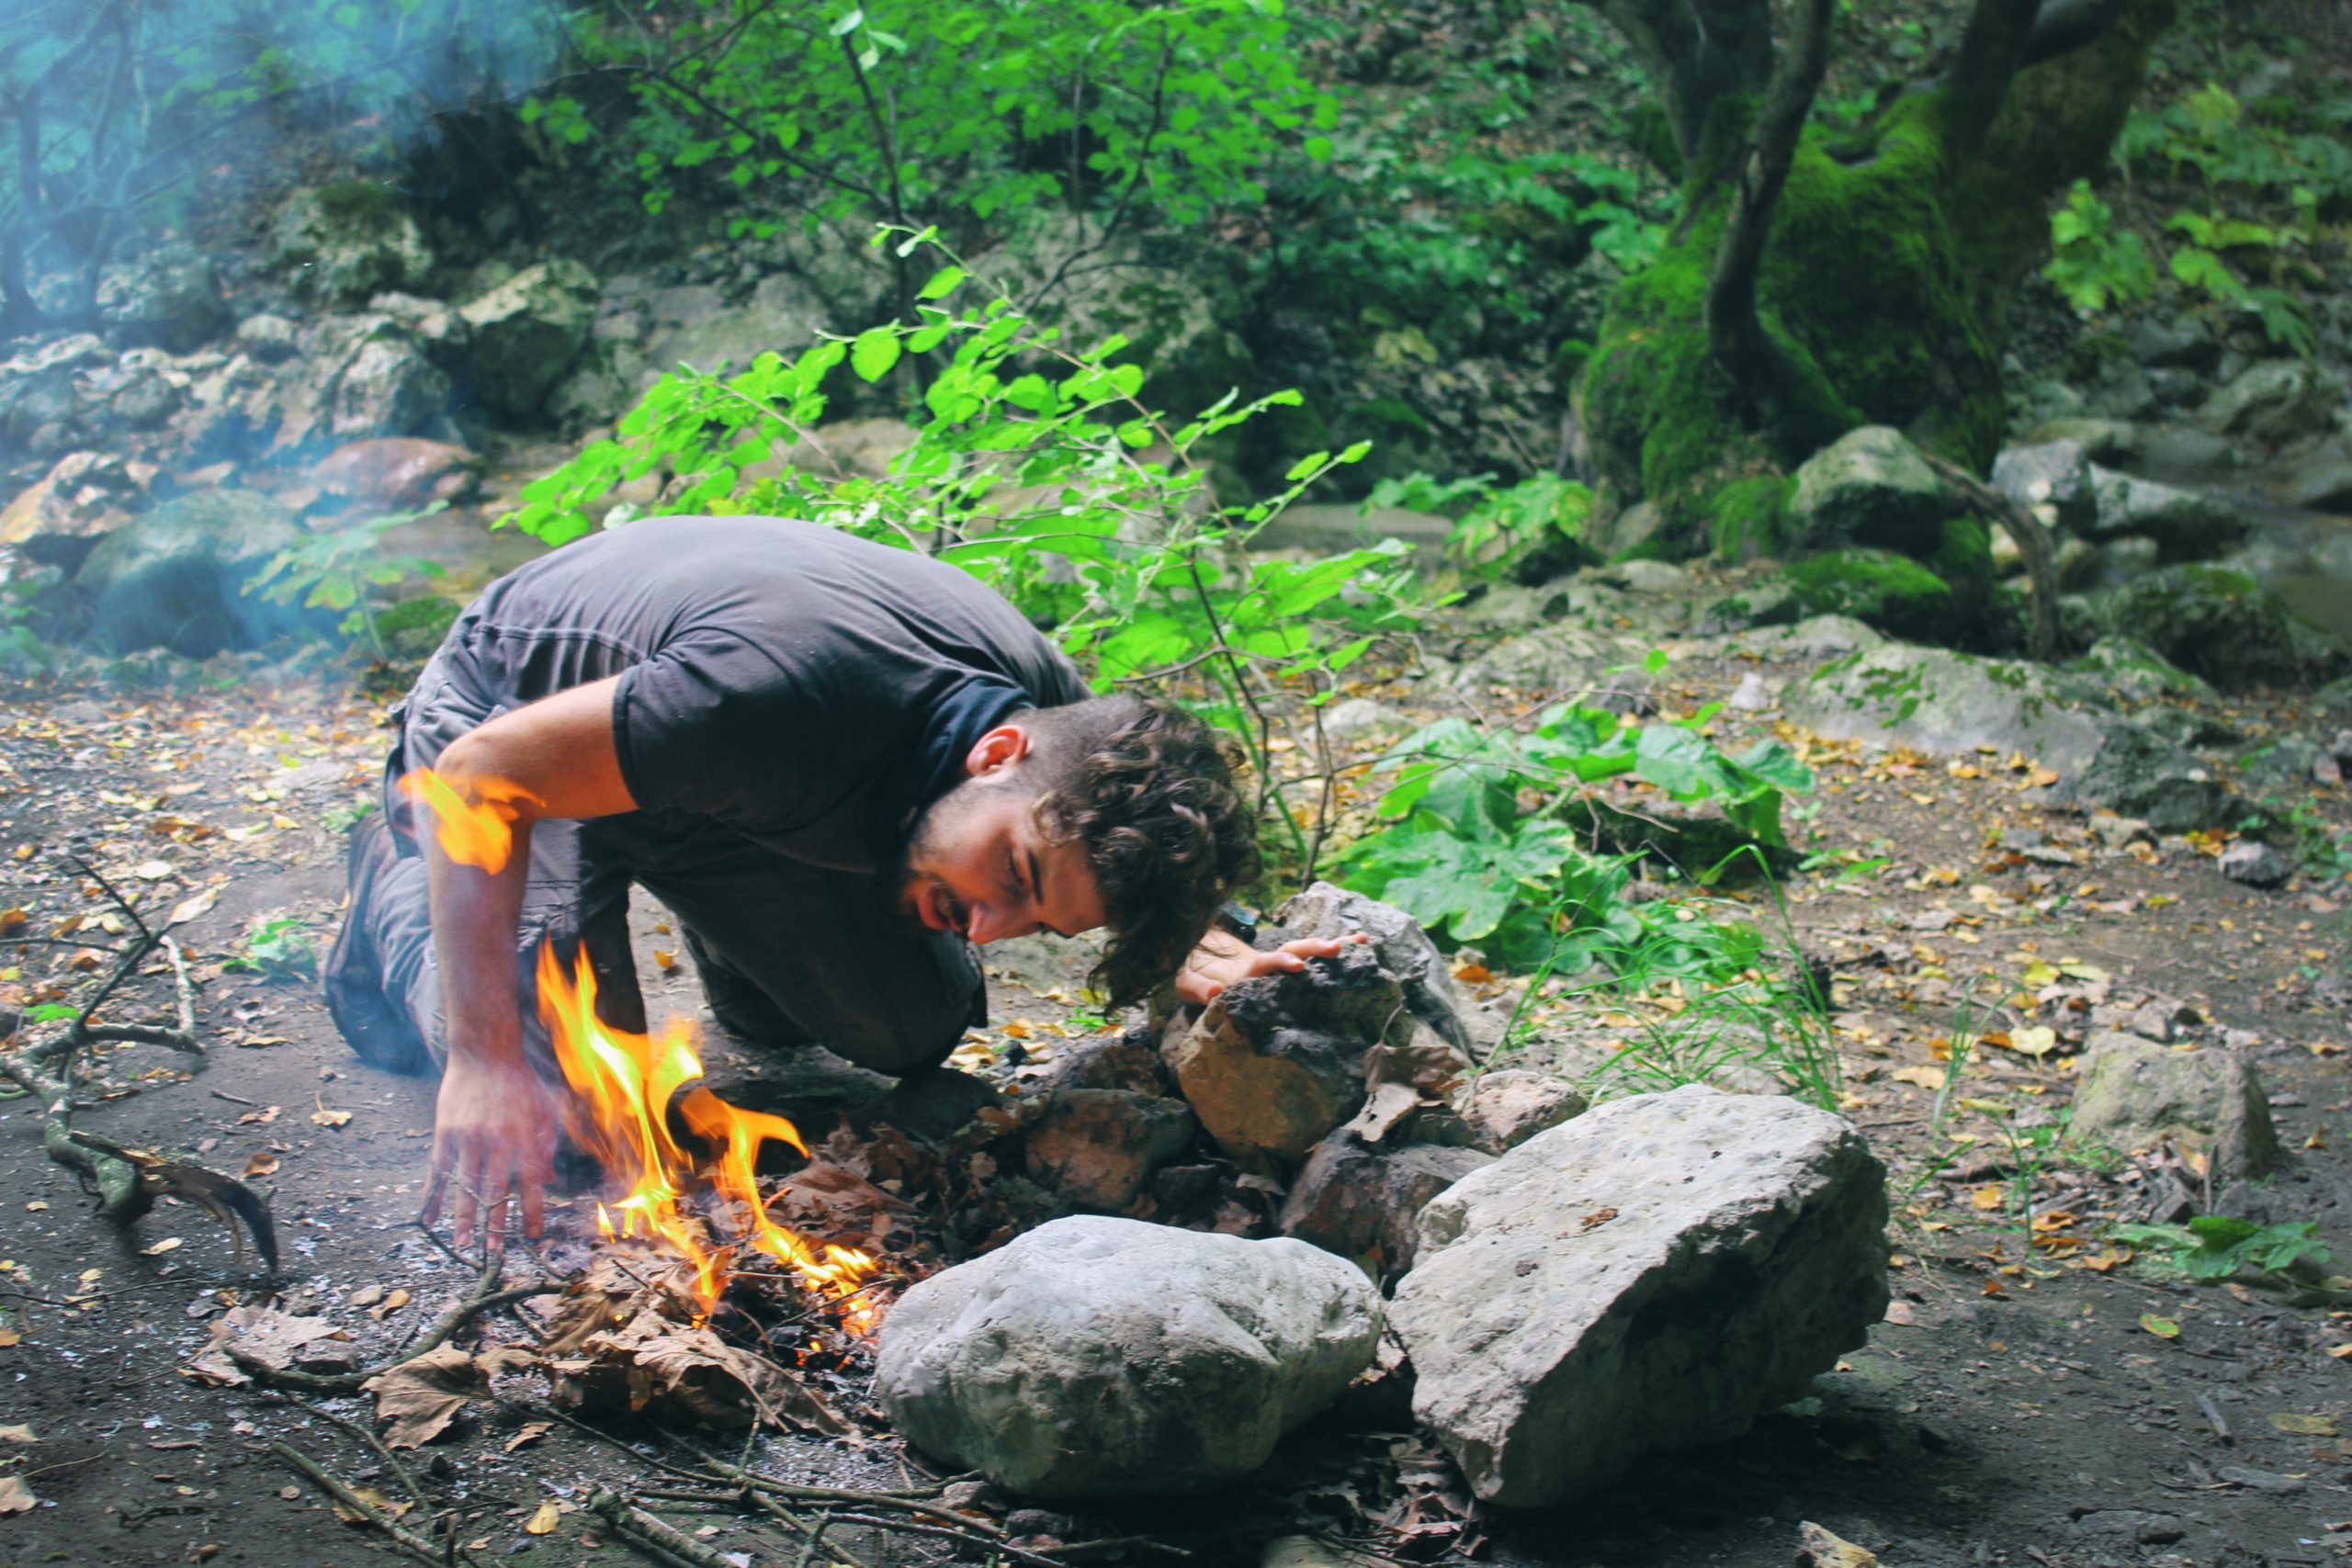 Simple Outdoor Survival Tips That All New Outdoor Adventurists Should
Know